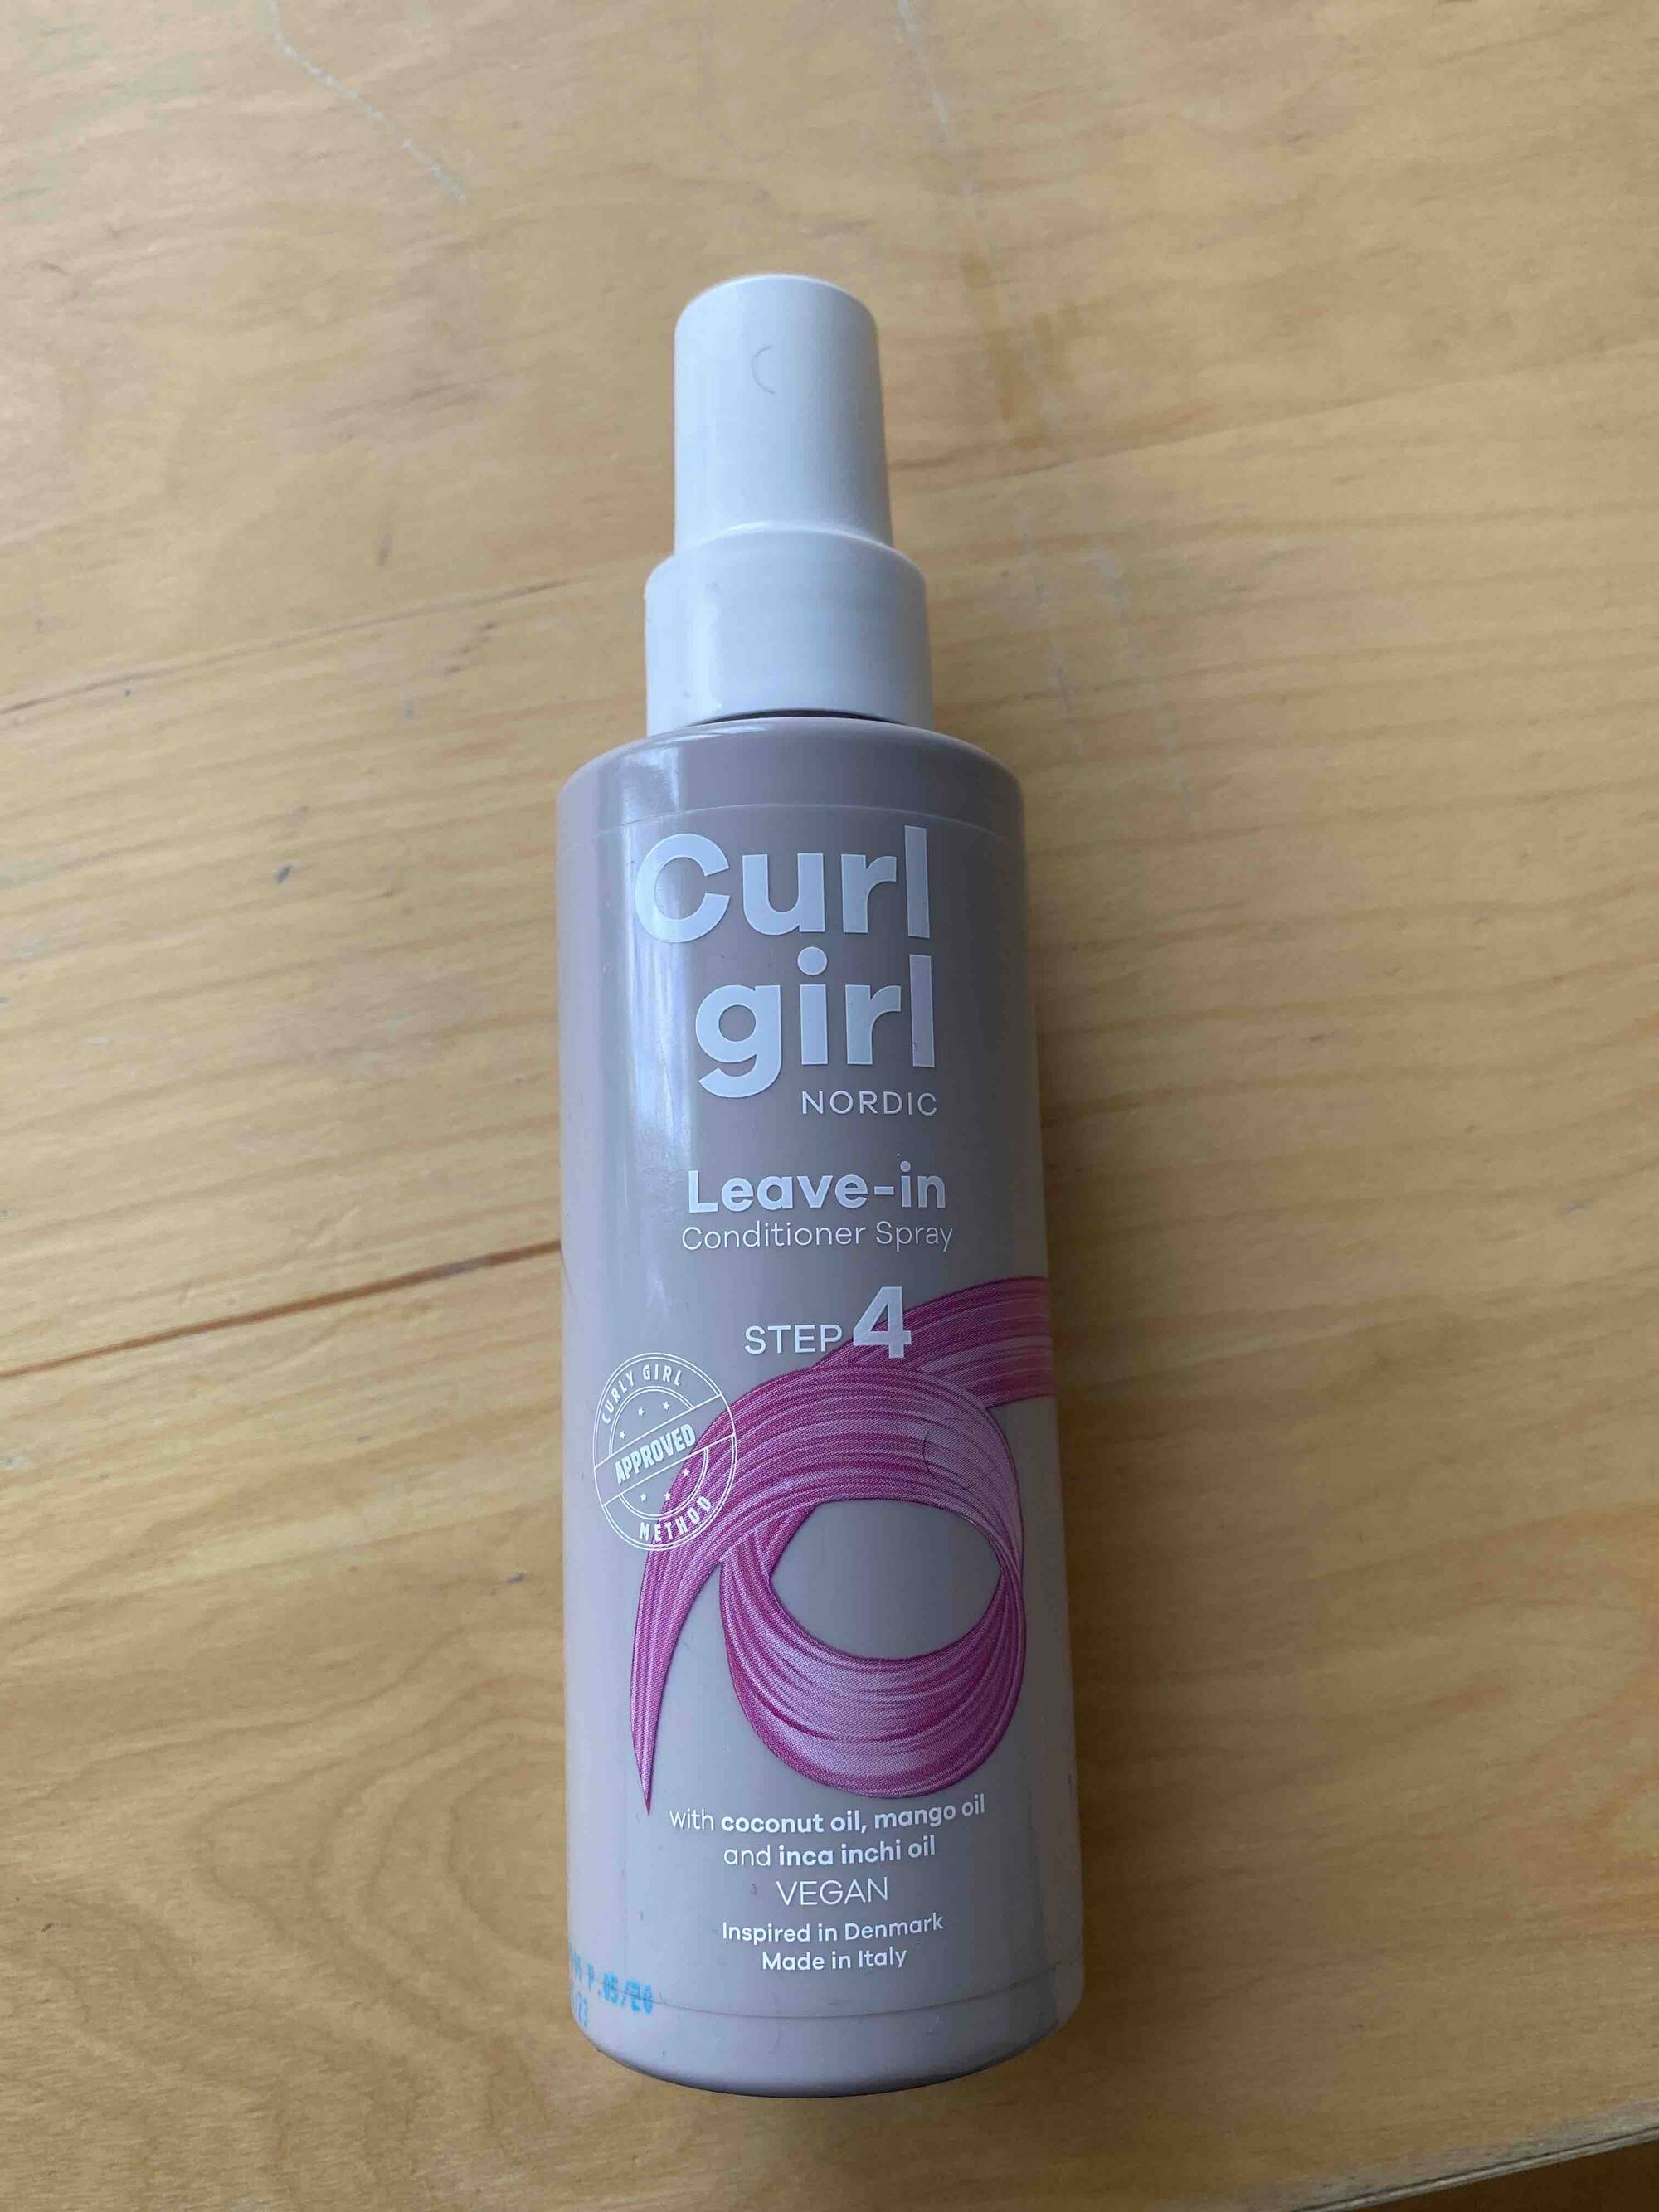 CURL GIRL - Nordic - Leave-in Conditioner spray step 4 